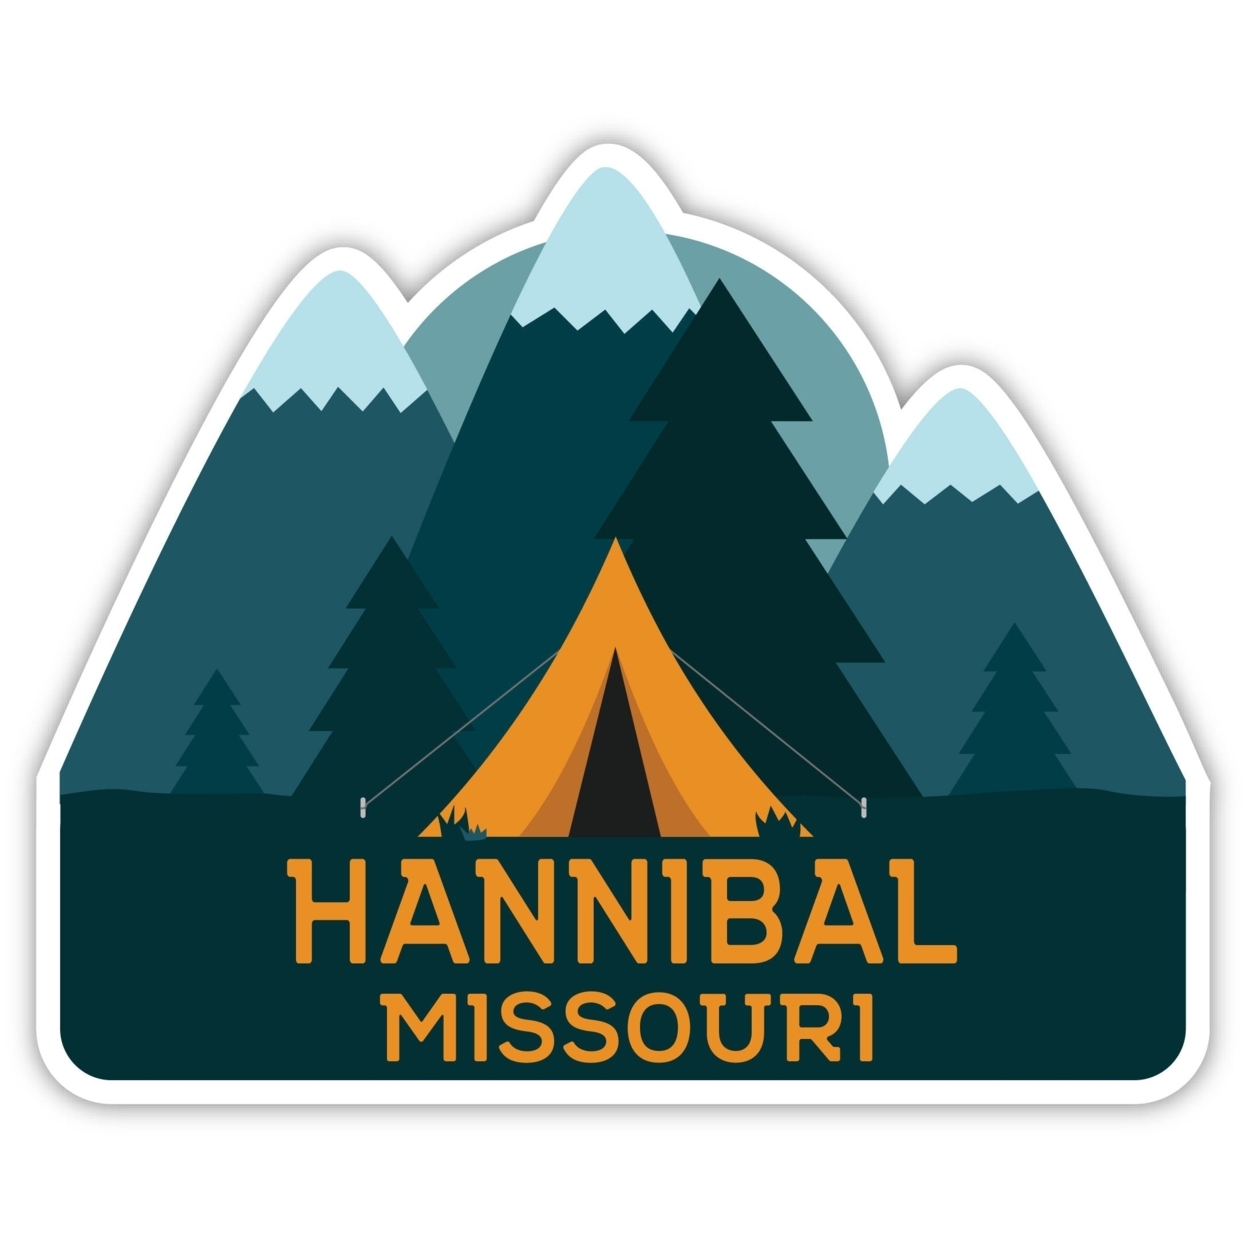 Hannibal Missouri Souvenir Decorative Stickers (Choose Theme And Size) - 4-Pack, 10-Inch, Camp Life